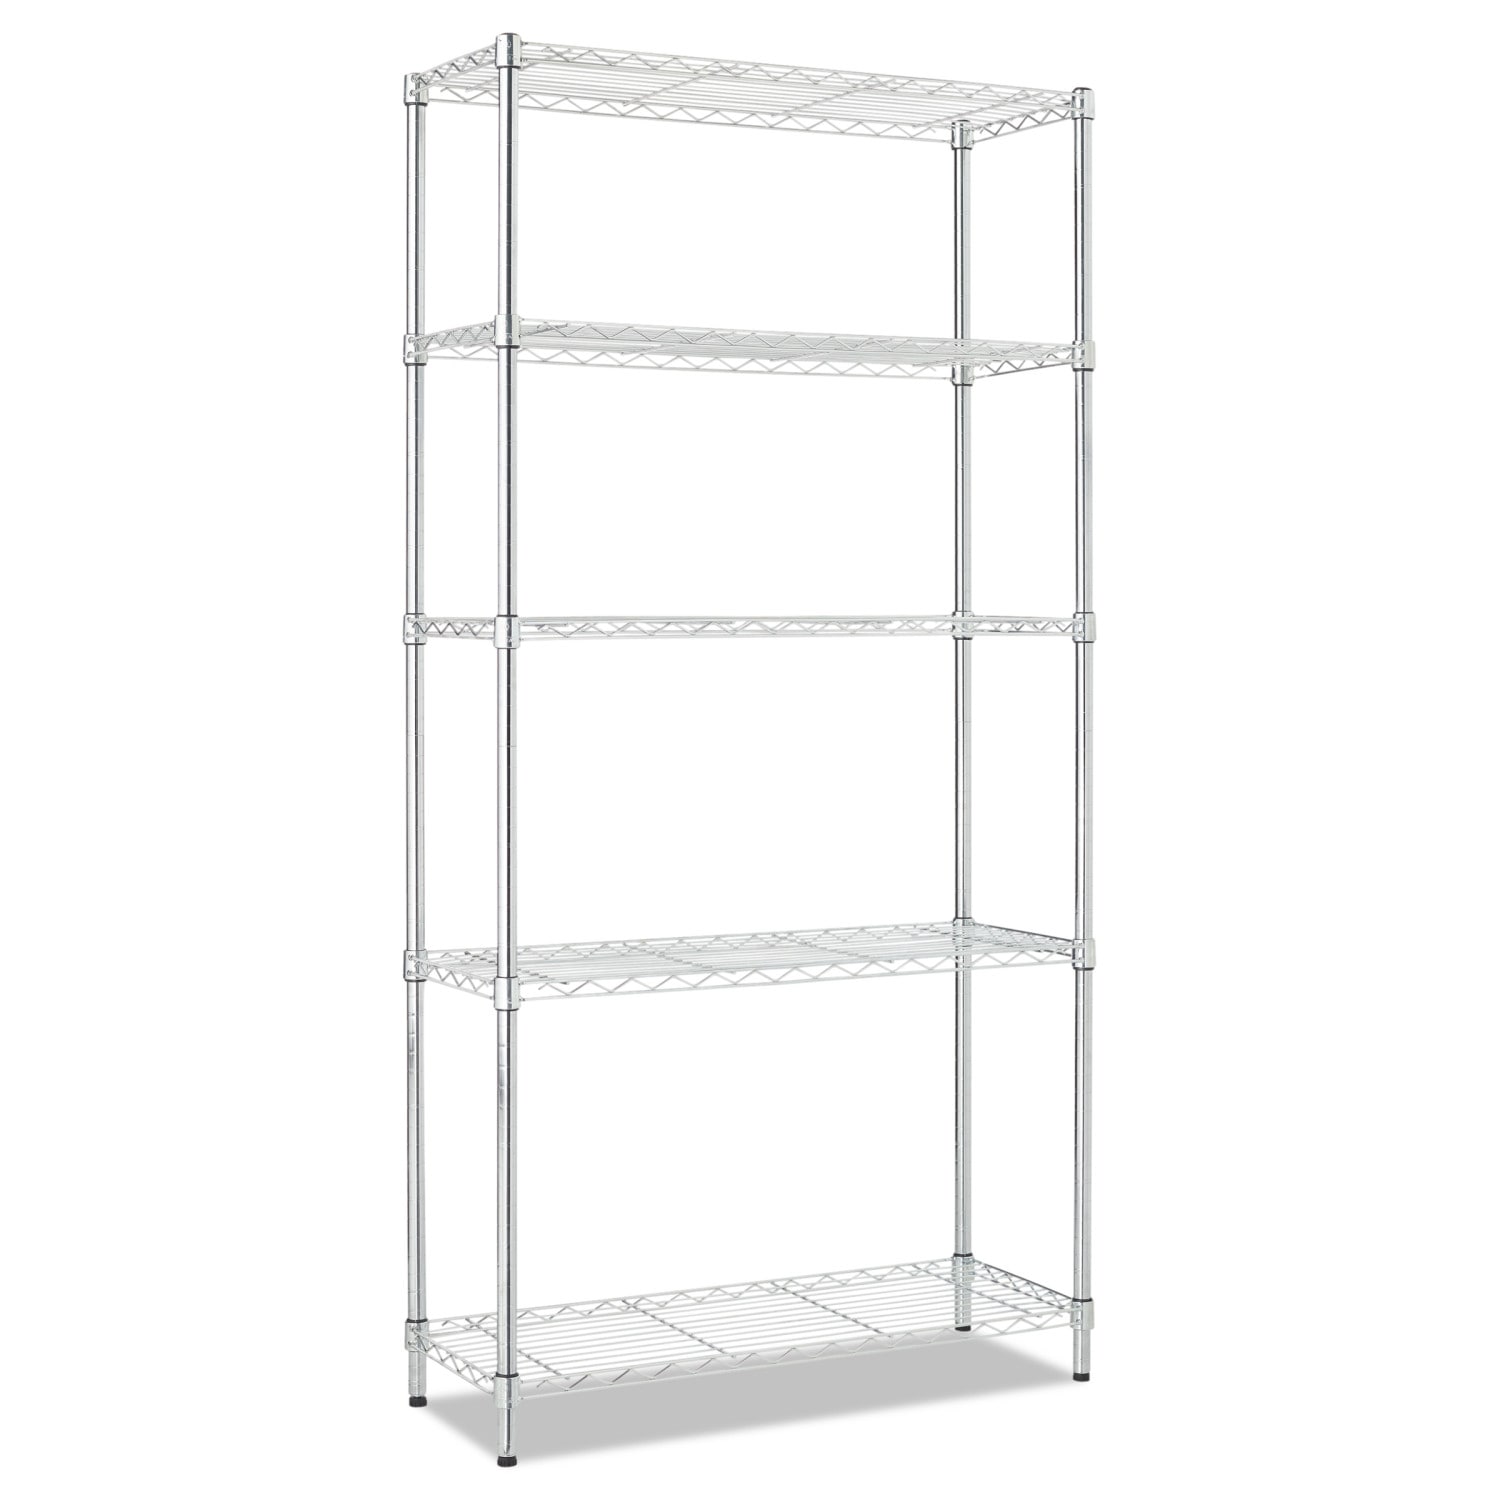 Tall Heavy-Duty Rust Free Stable Shelving Freestanding 5-Tier Rack Made in USA 